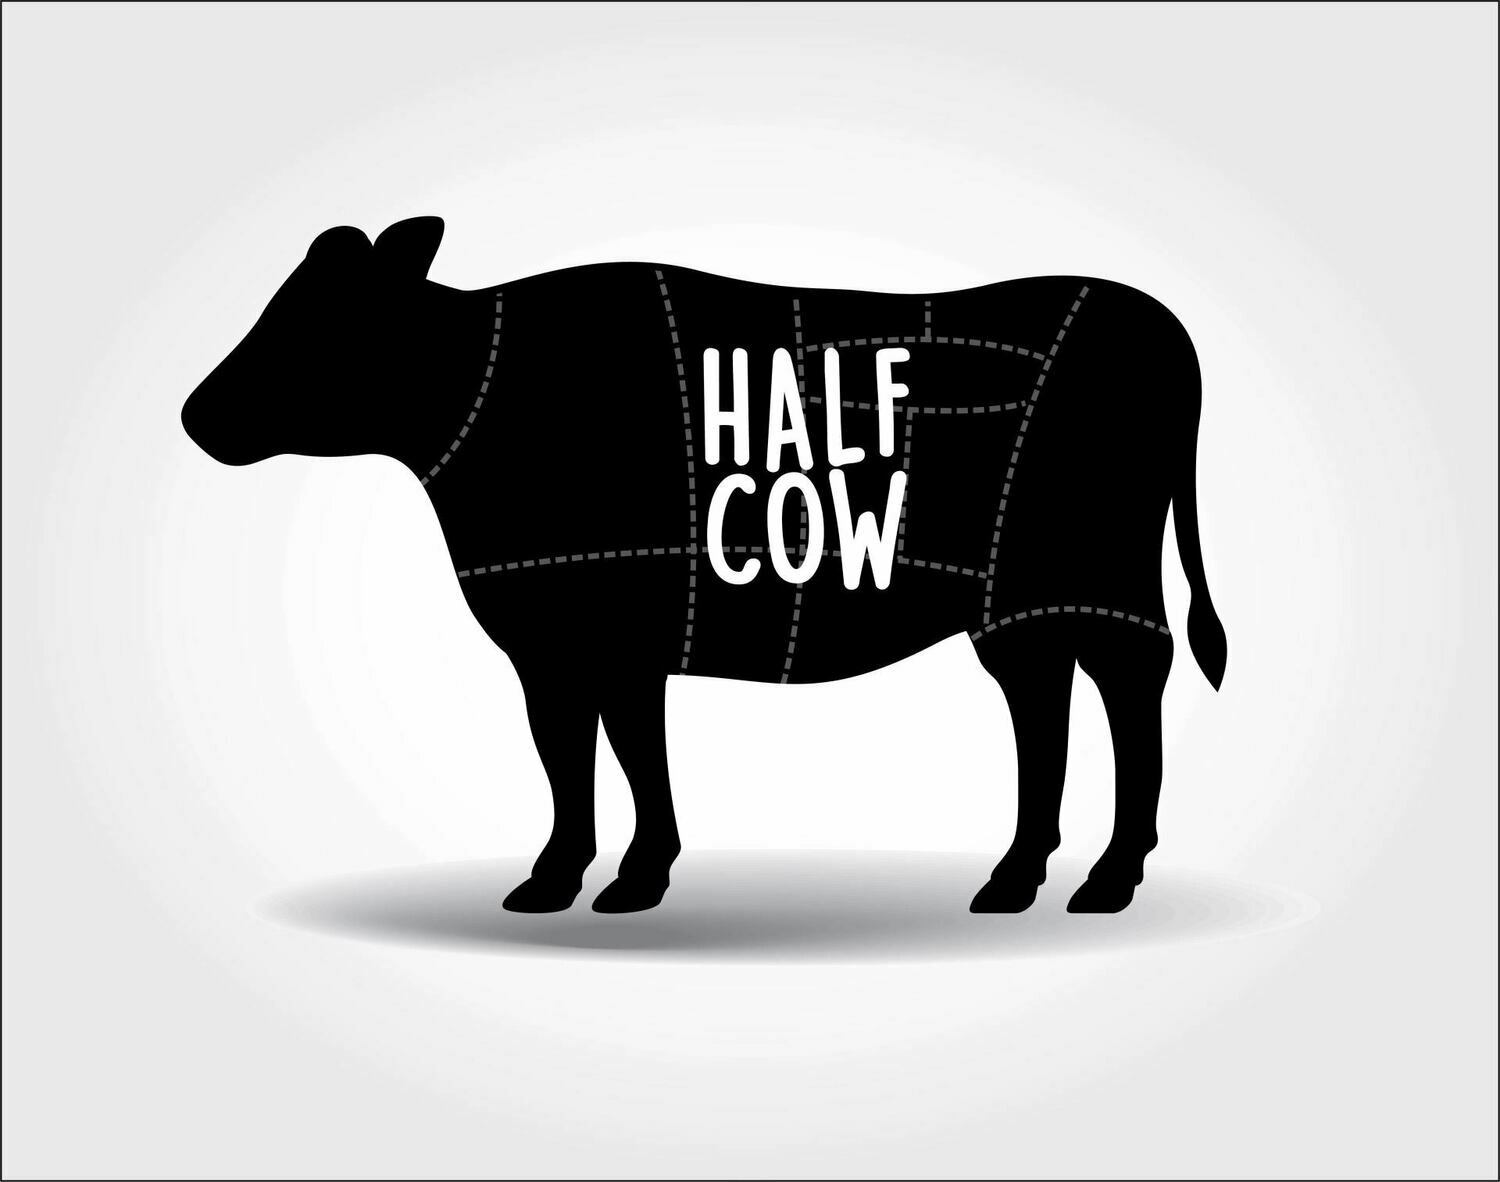 Half calf will be offered at$10.00/lb. for 200 lbs. The price( $2100 )  includes 5% processing fee. Call 830-660-7751 and pay check or cash